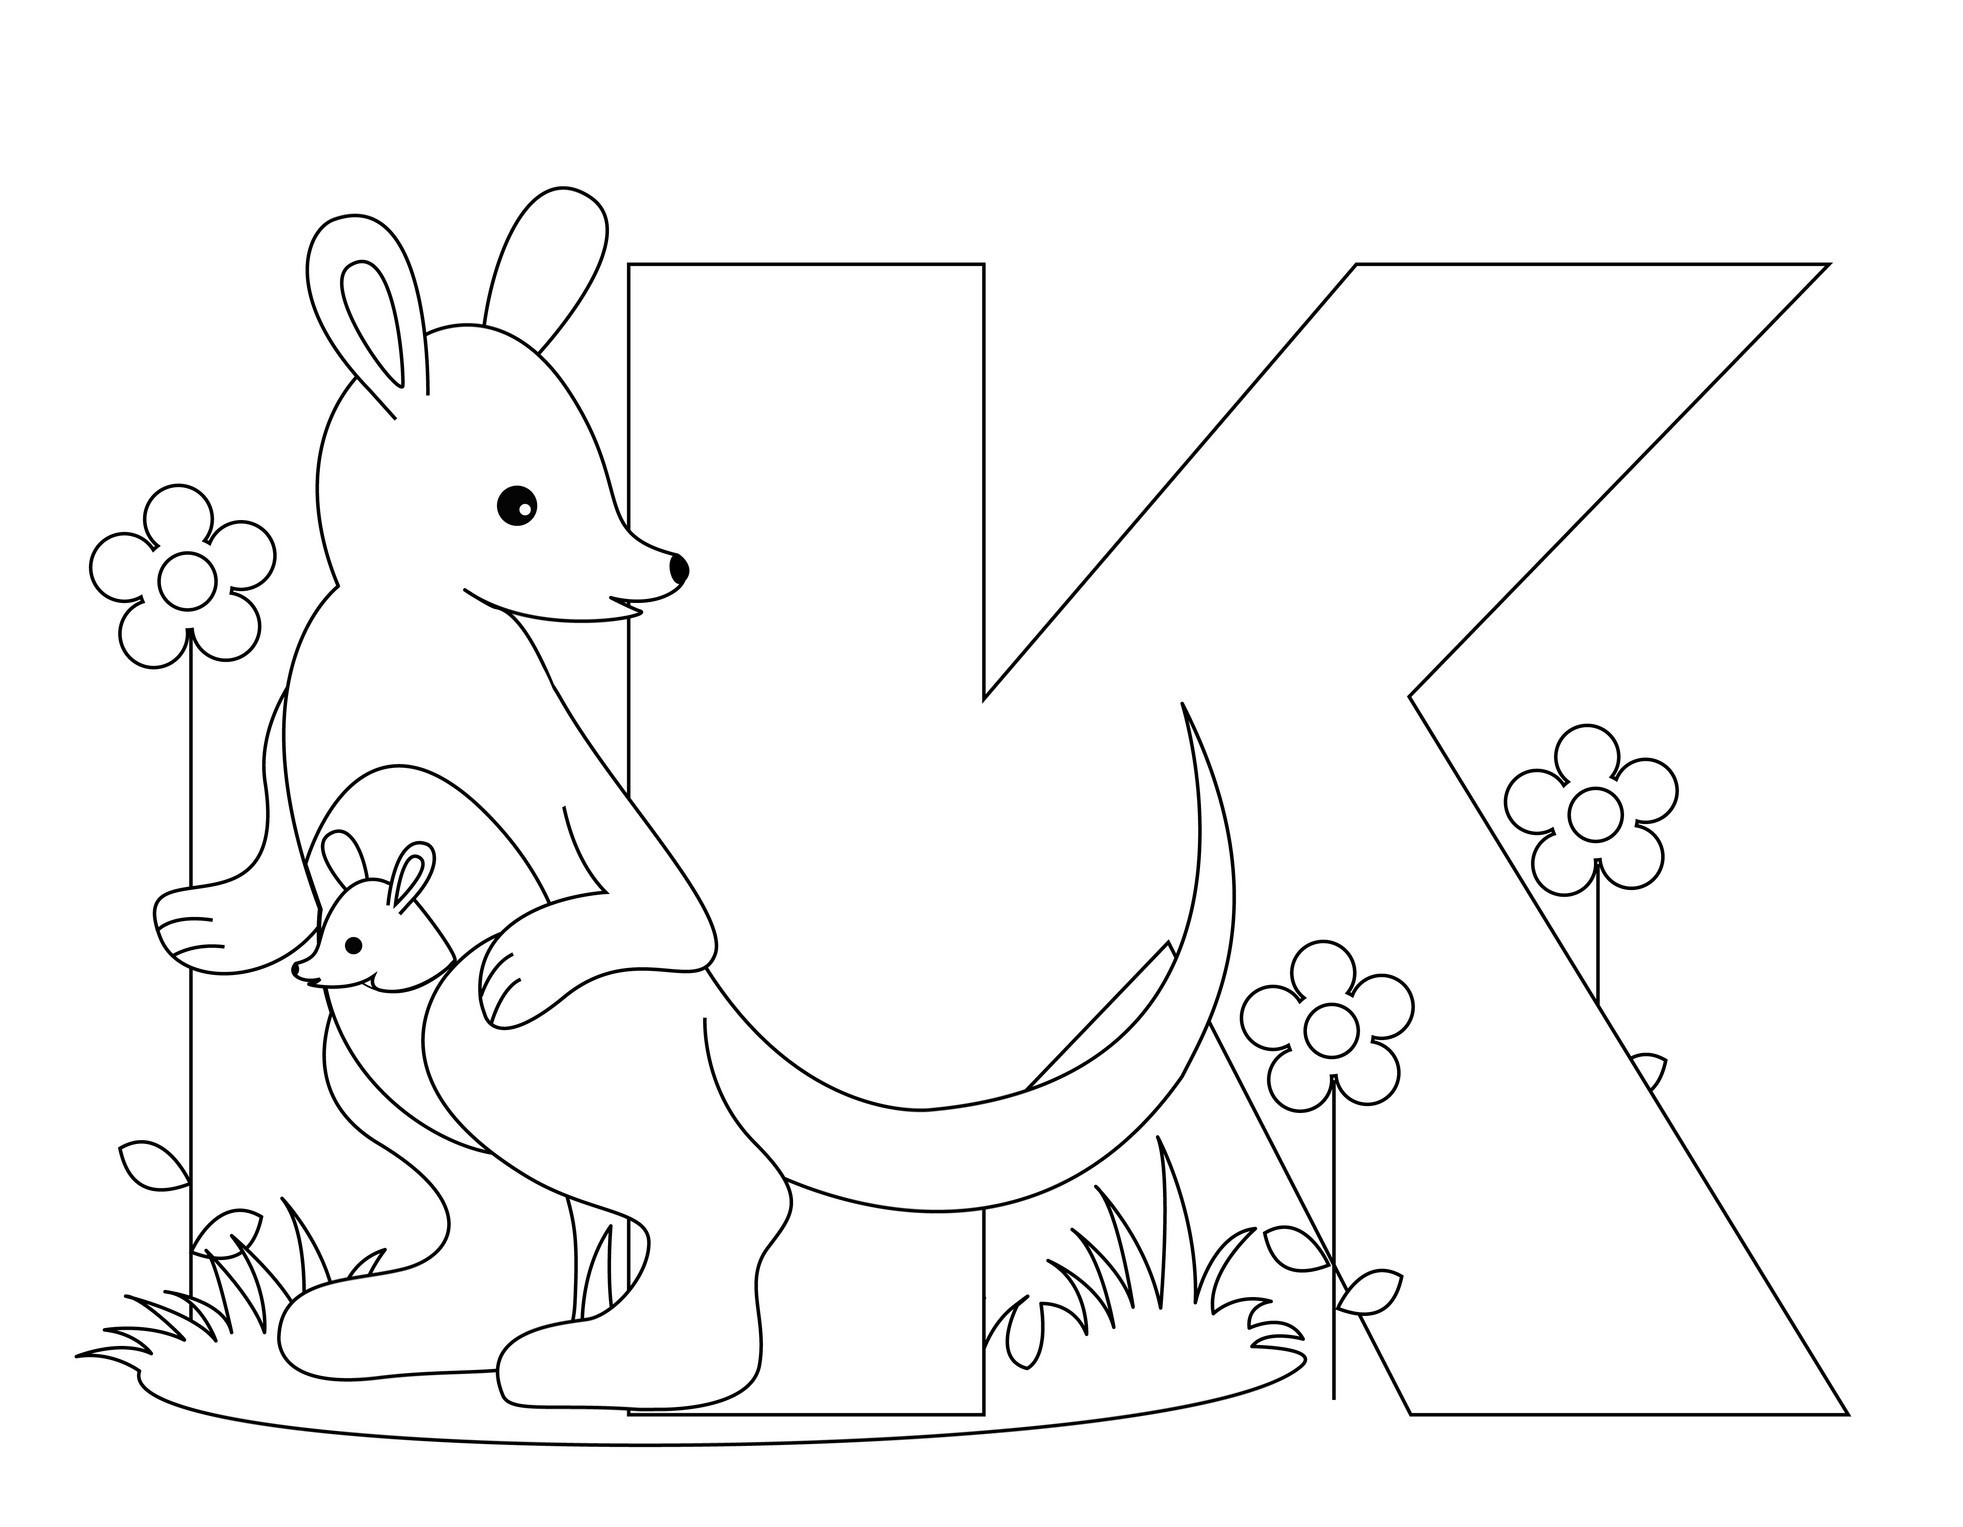 Alphebet Coloring Pages
 Free Printable Alphabet Coloring Pages for Kids Best